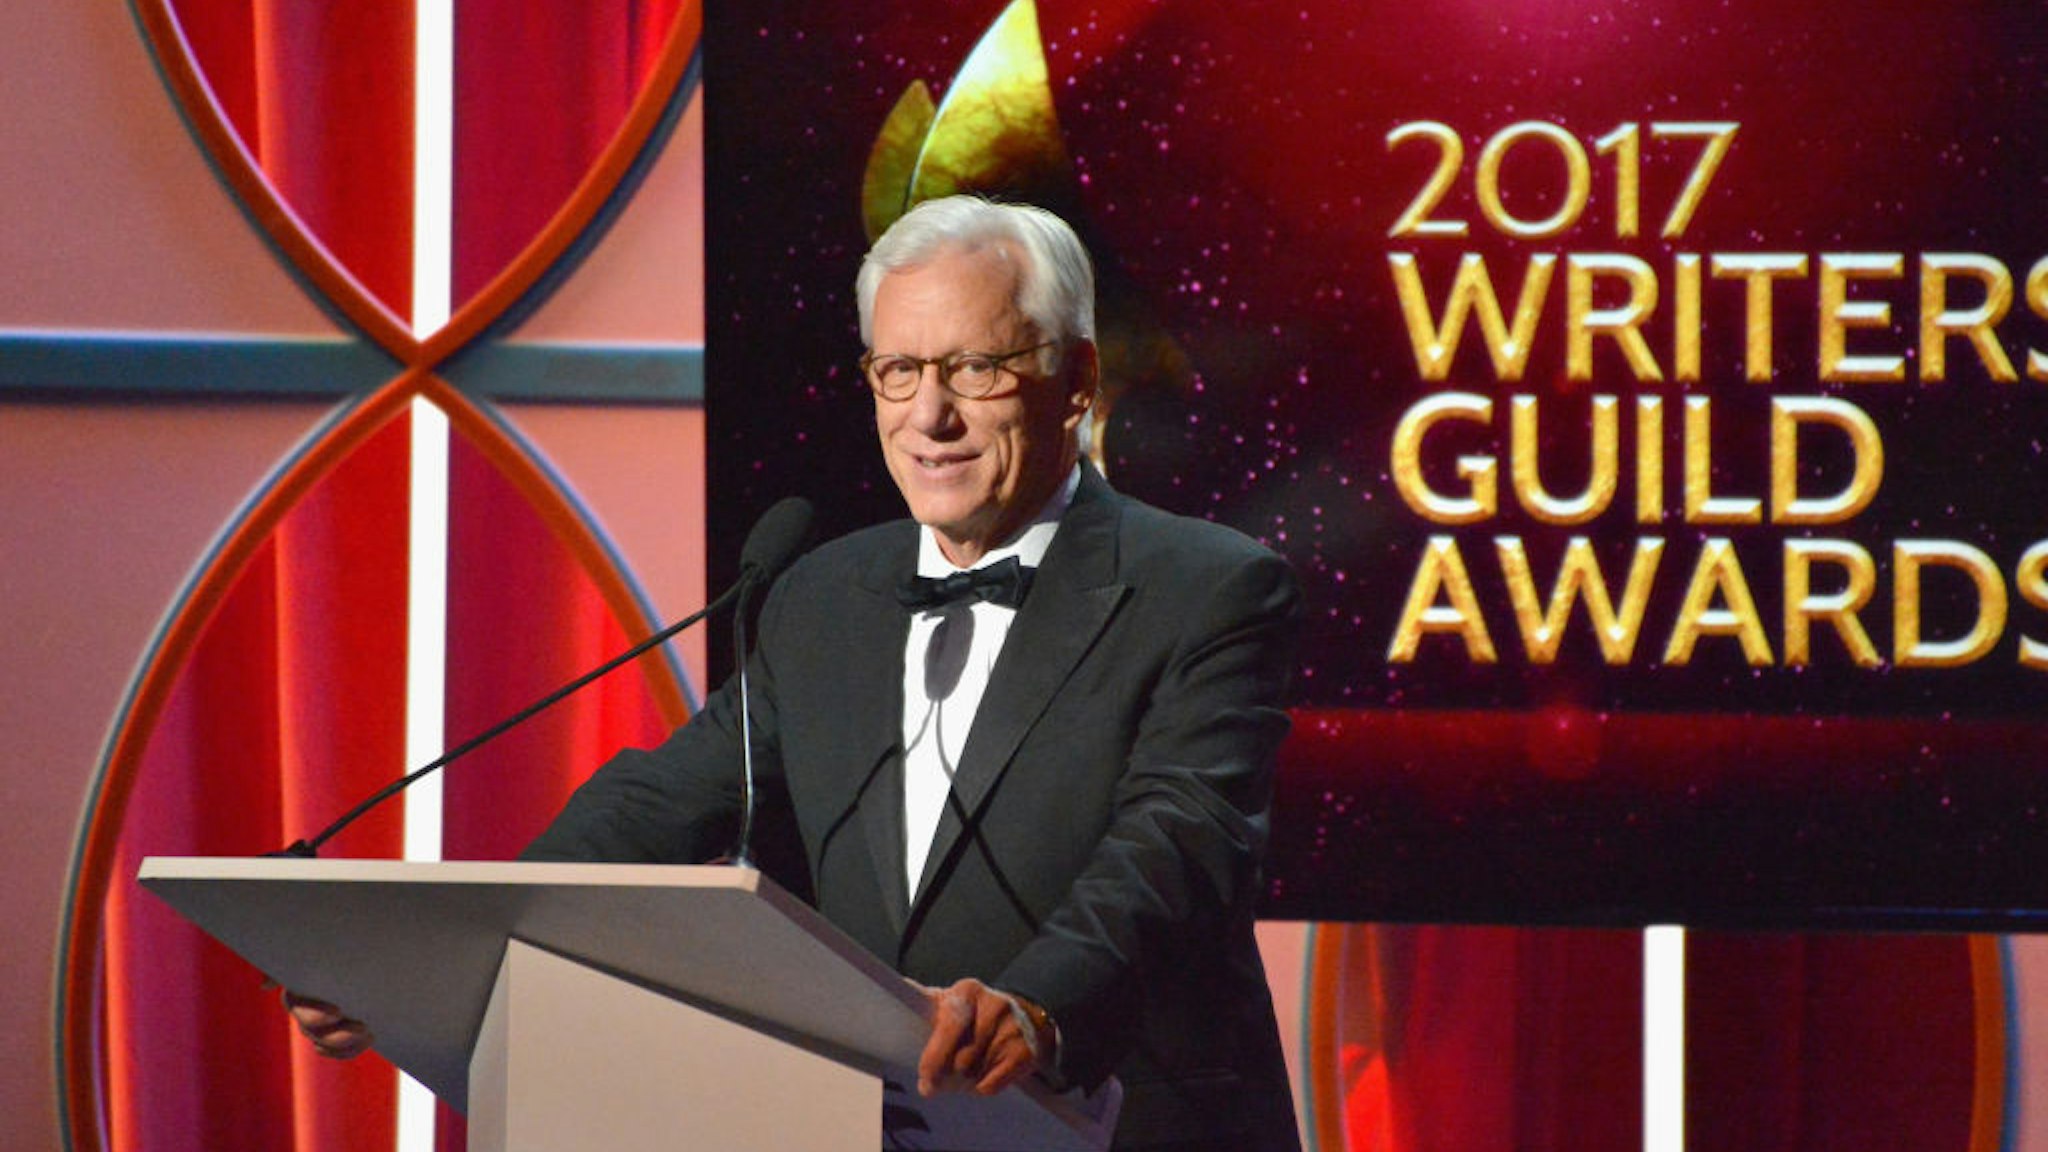 Actor James Woods speaks onstage during the 2017 Writers Guild Awards L.A. Ceremony at The Beverly Hilton Hotel on February 19, 2017 in Beverly Hills, California.